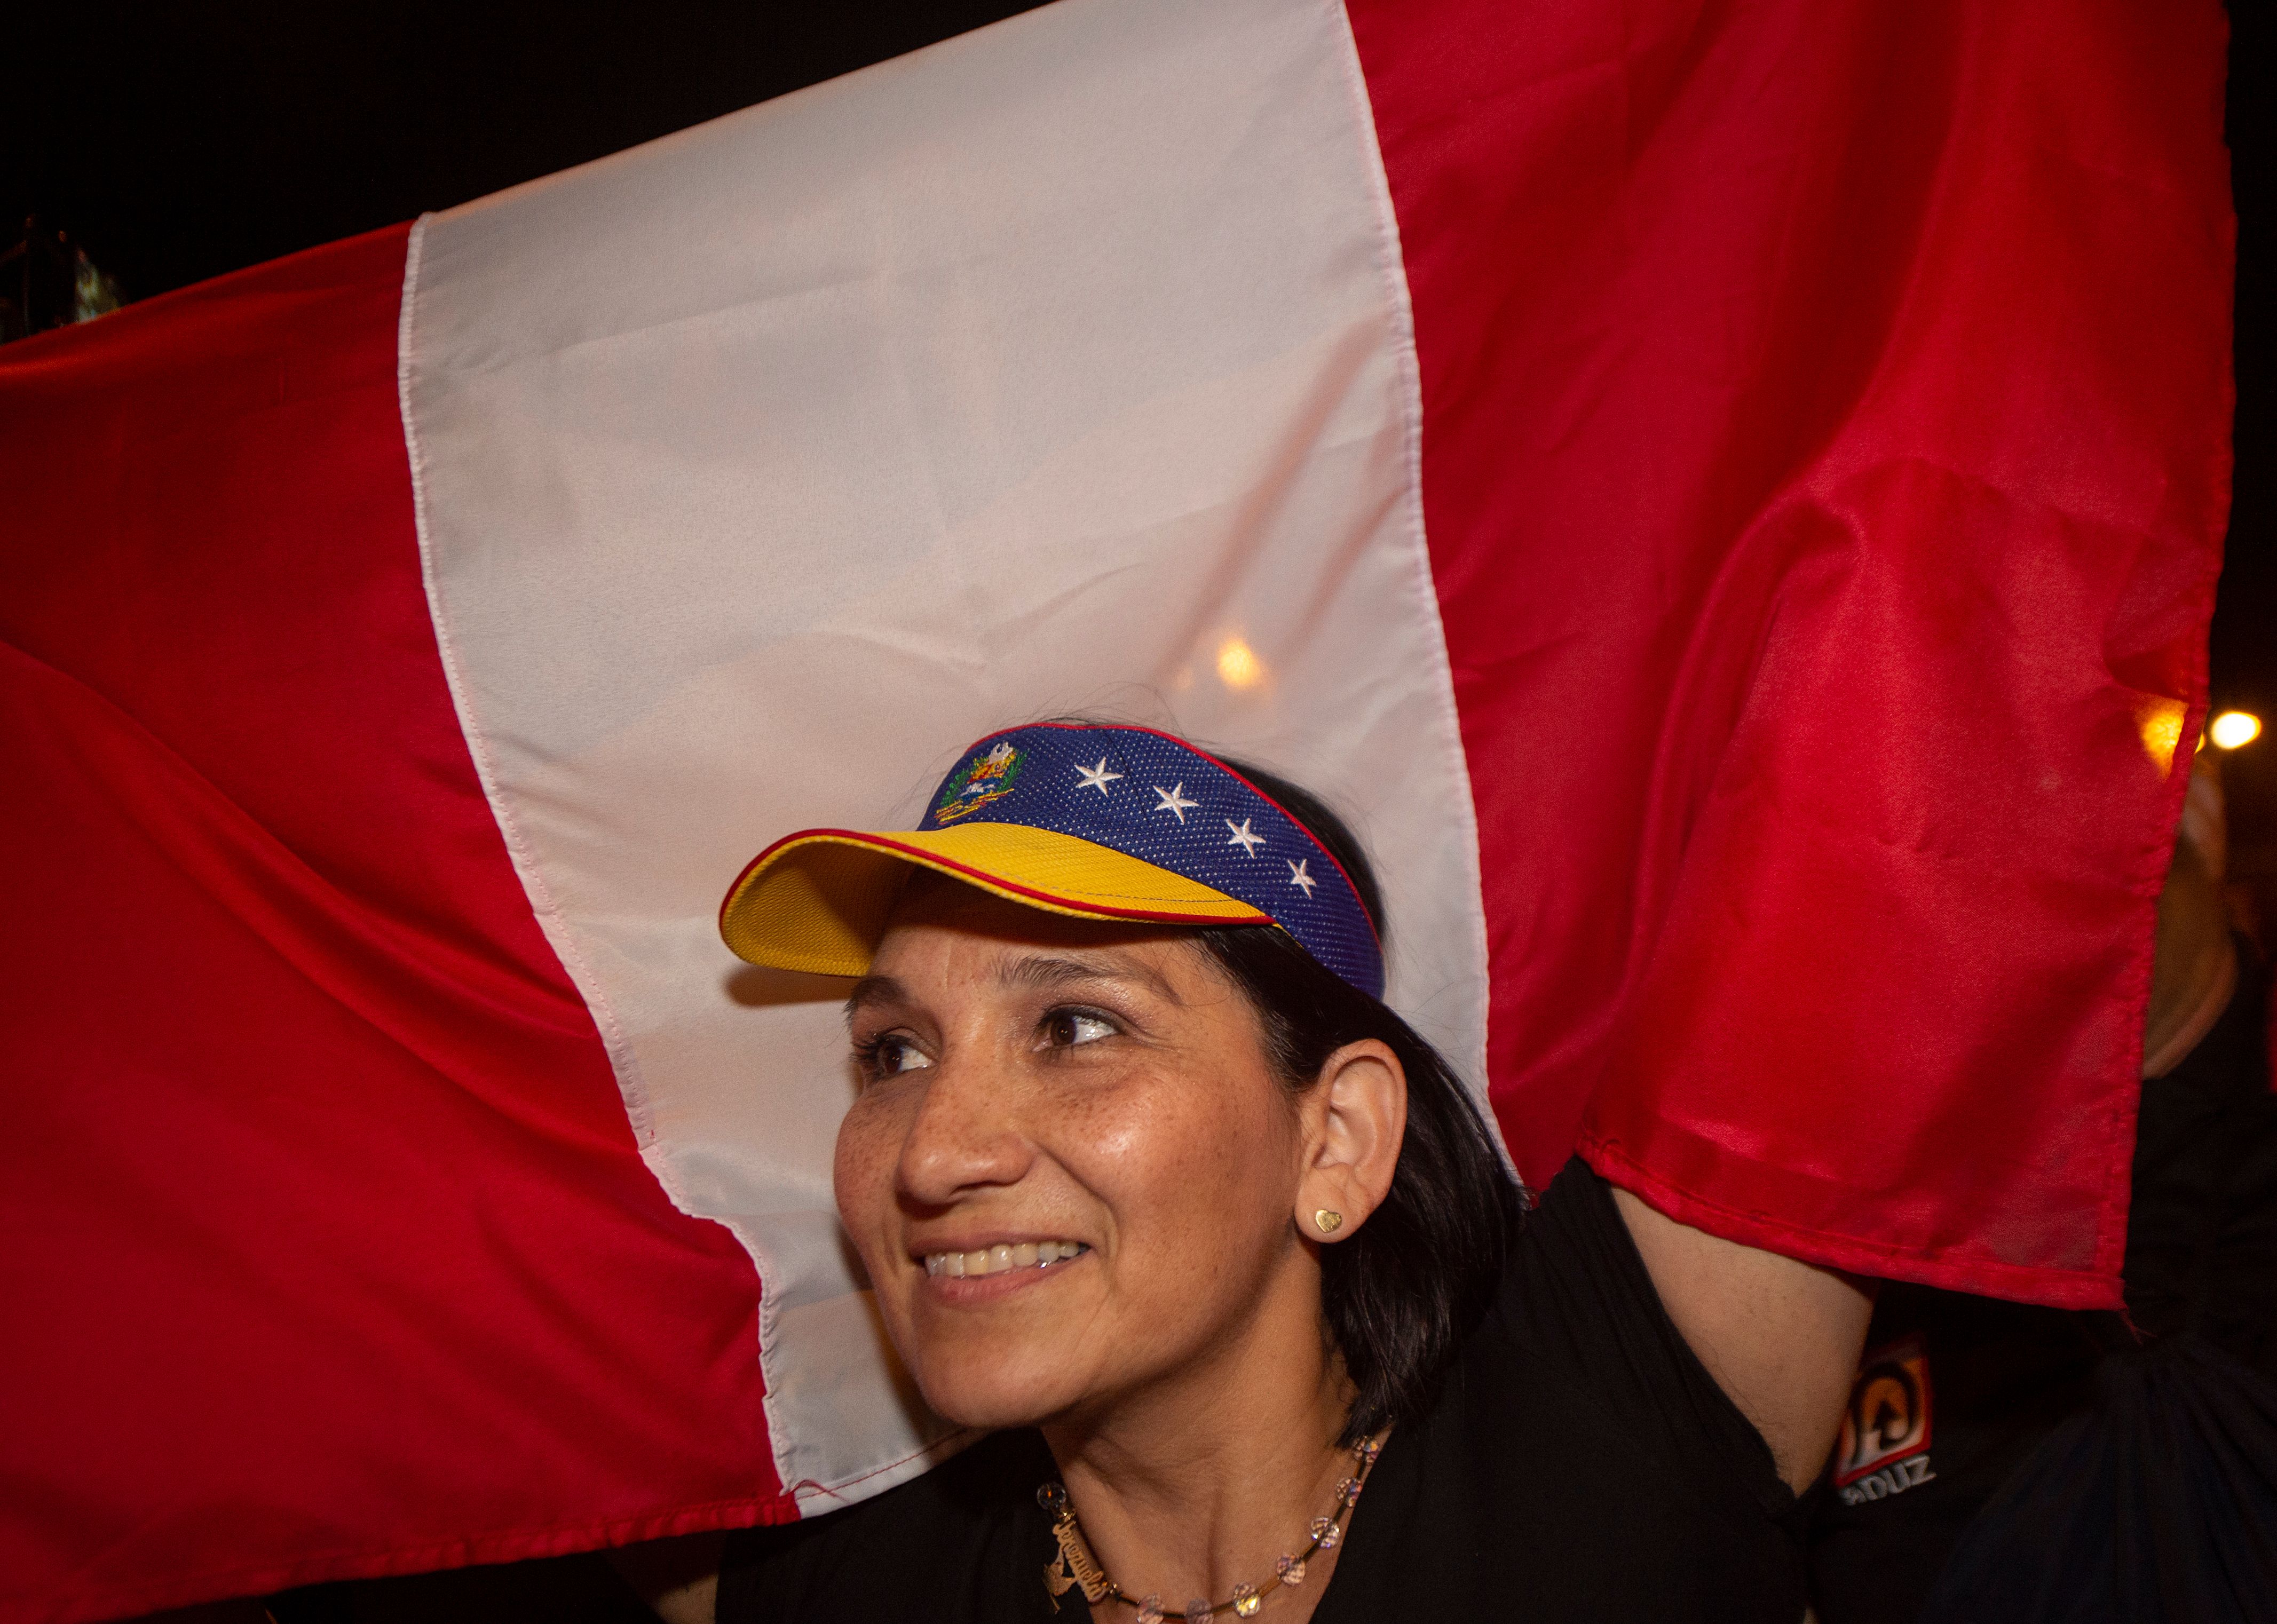 A Venezuelan woman waves a Peruvian flag at a protest against the government of President Maduro in Lima